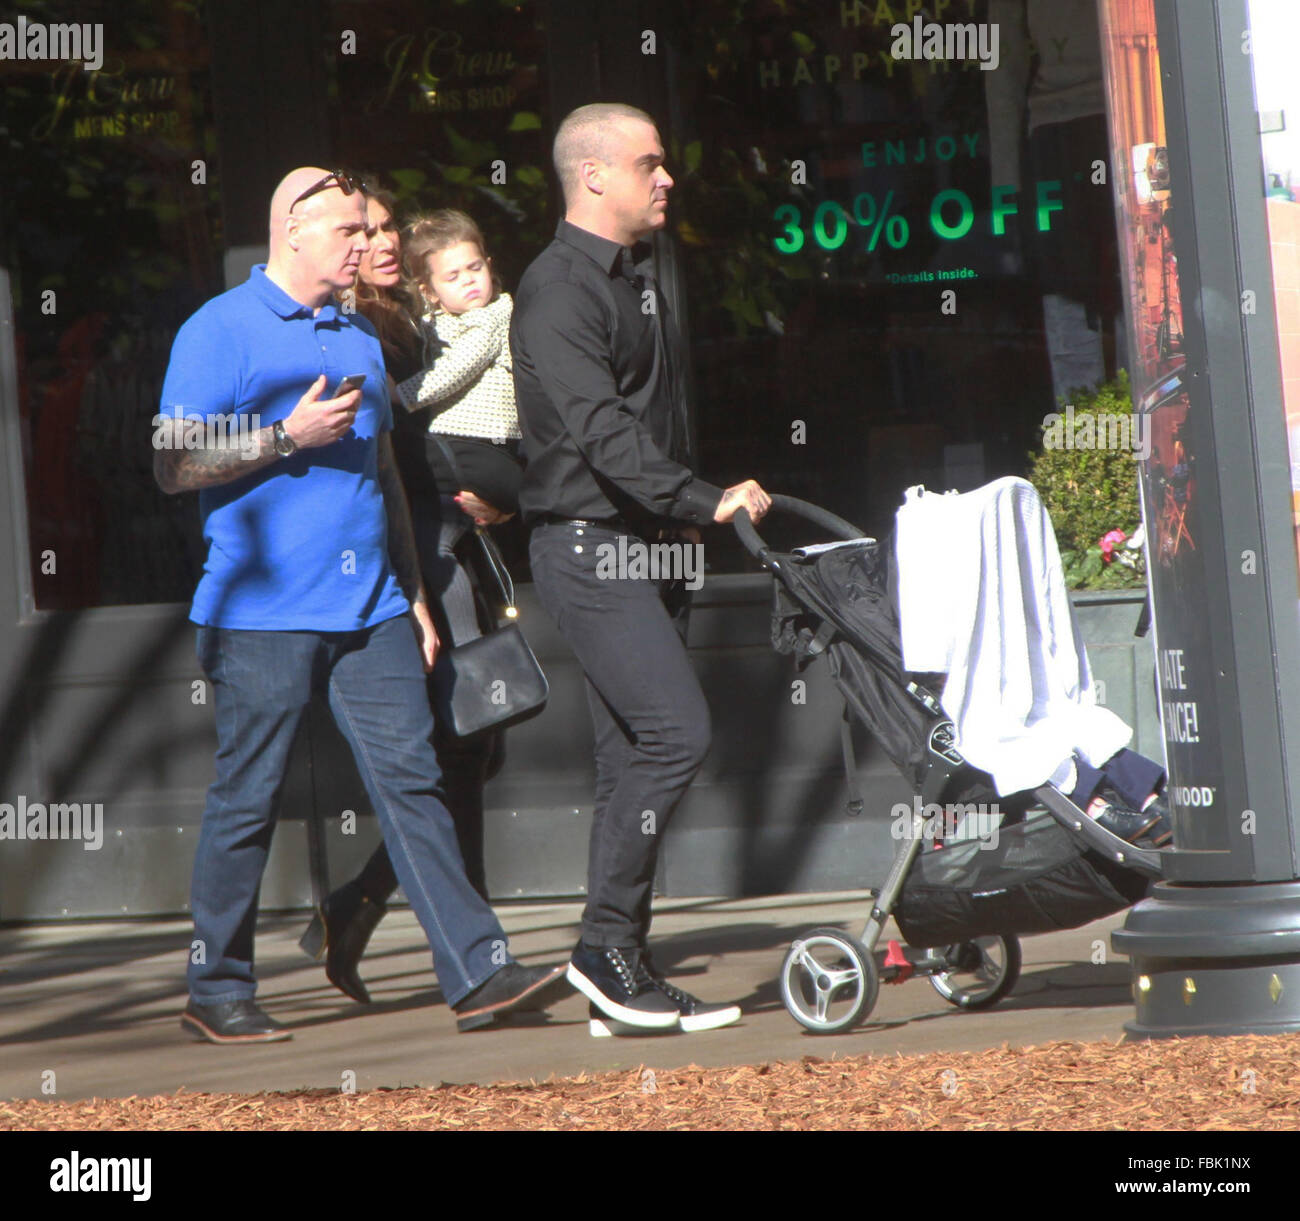 Robbie Williams takes his family shopping at The Grove in Hollywood  Featuring: Robbie Williams, Ayda Field, Theodora Rose Williams Where: Hollywood, California, United States When: 17 Dec 2015 Stock Photo